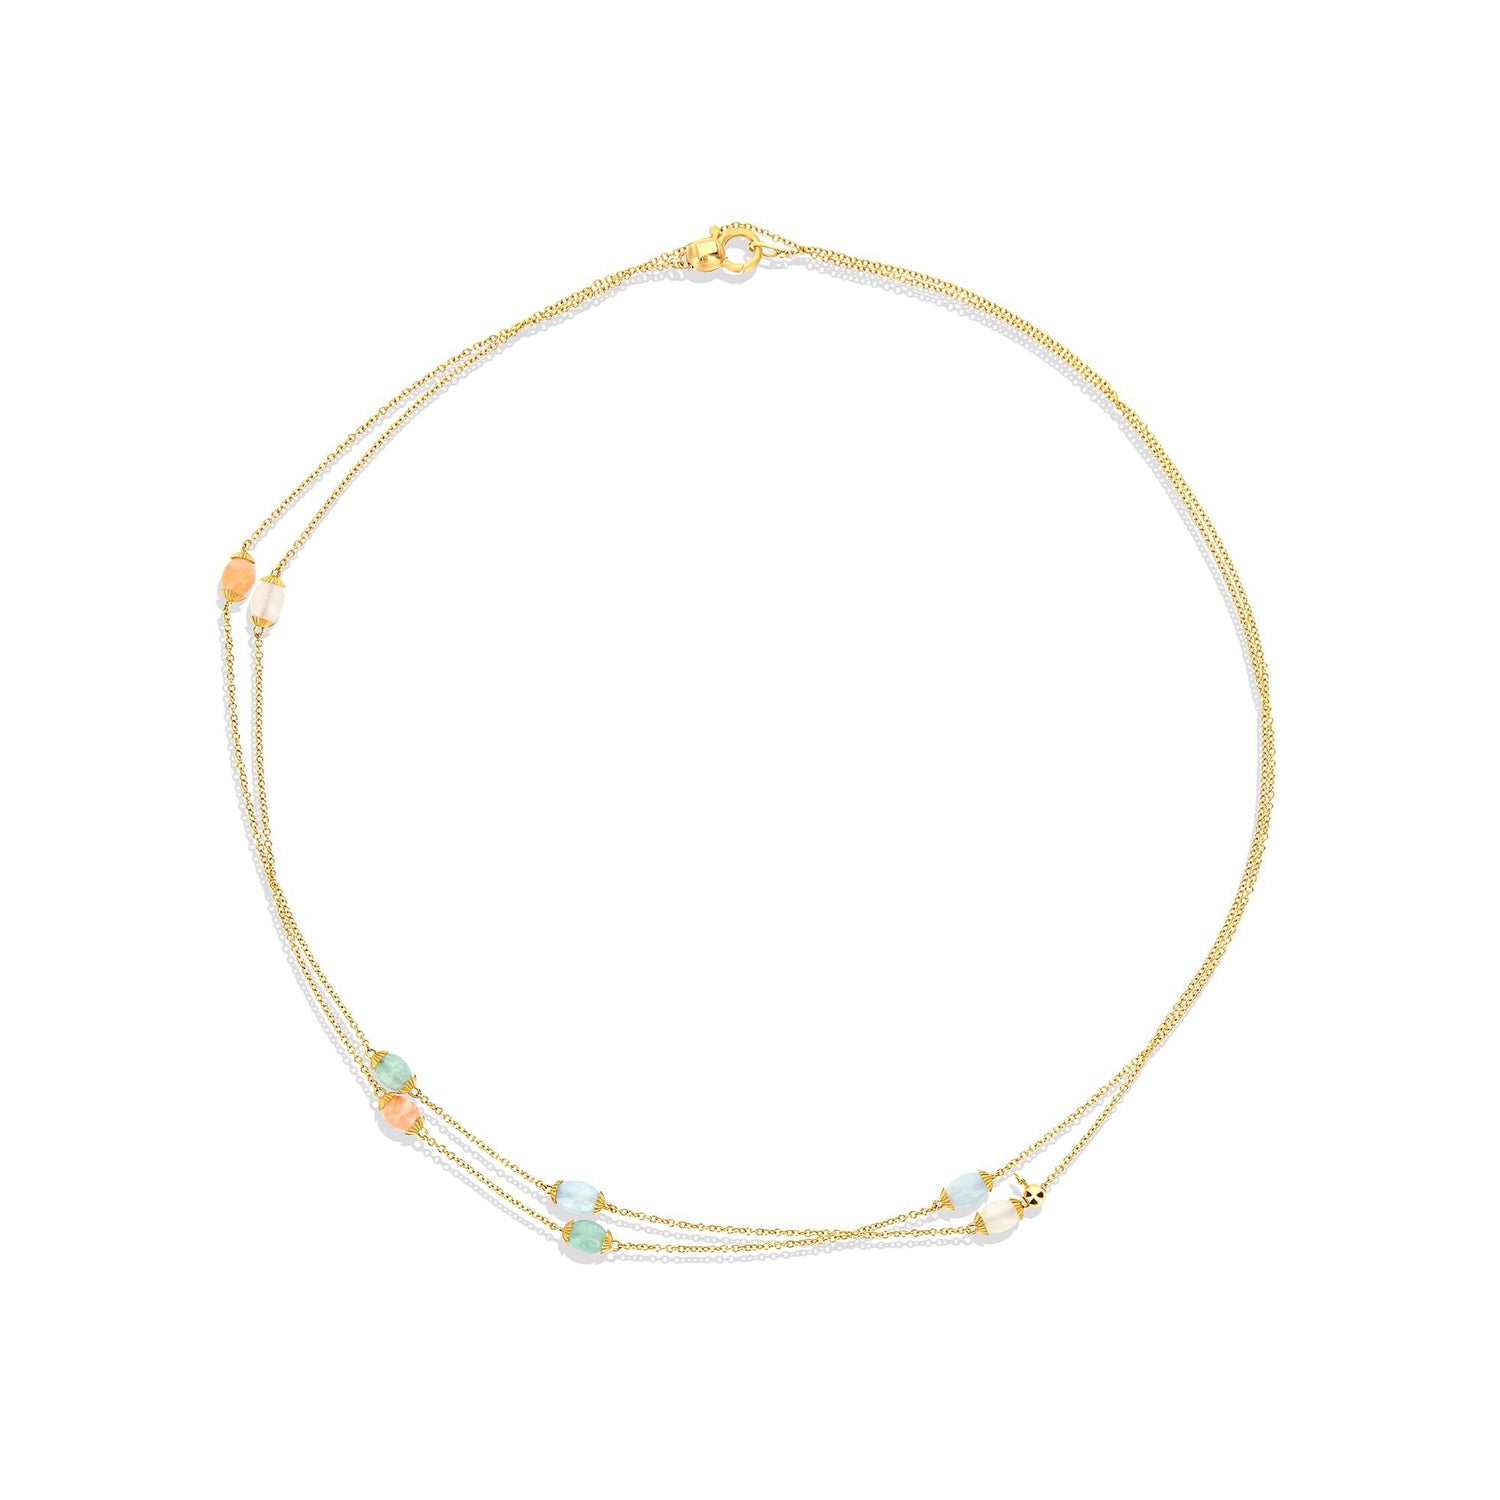 RAINBOW "AMULETS" GOLD AND NATURAL STONES CONVERTIBLE NECKLACE (LARGE)